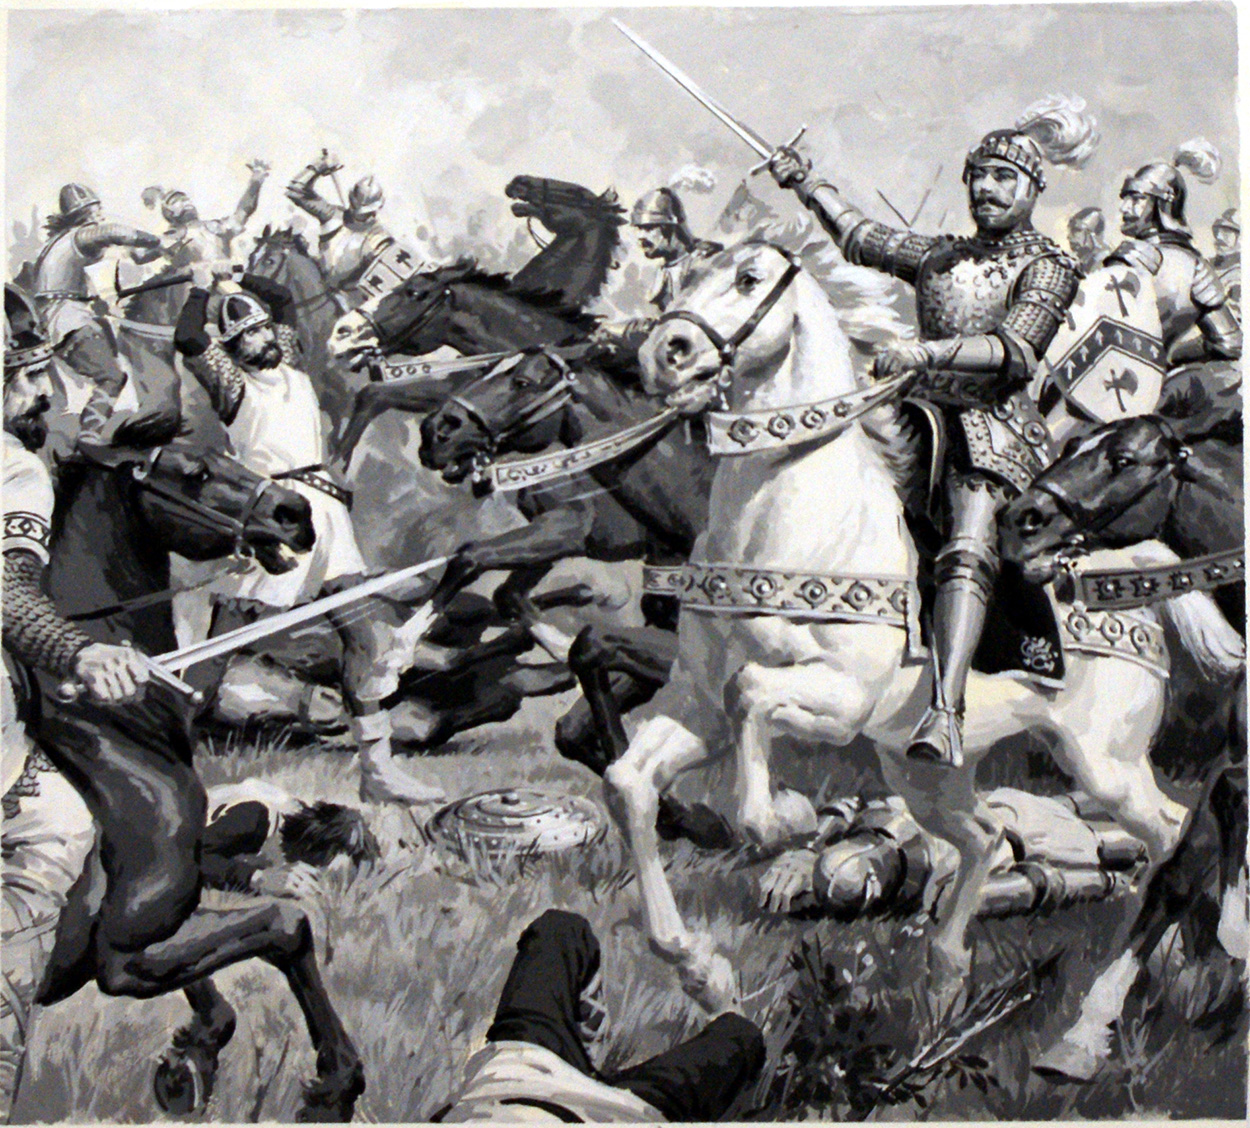 King Arthur leading the charge (Original) art by Jack Keay at The Illustration Art Gallery